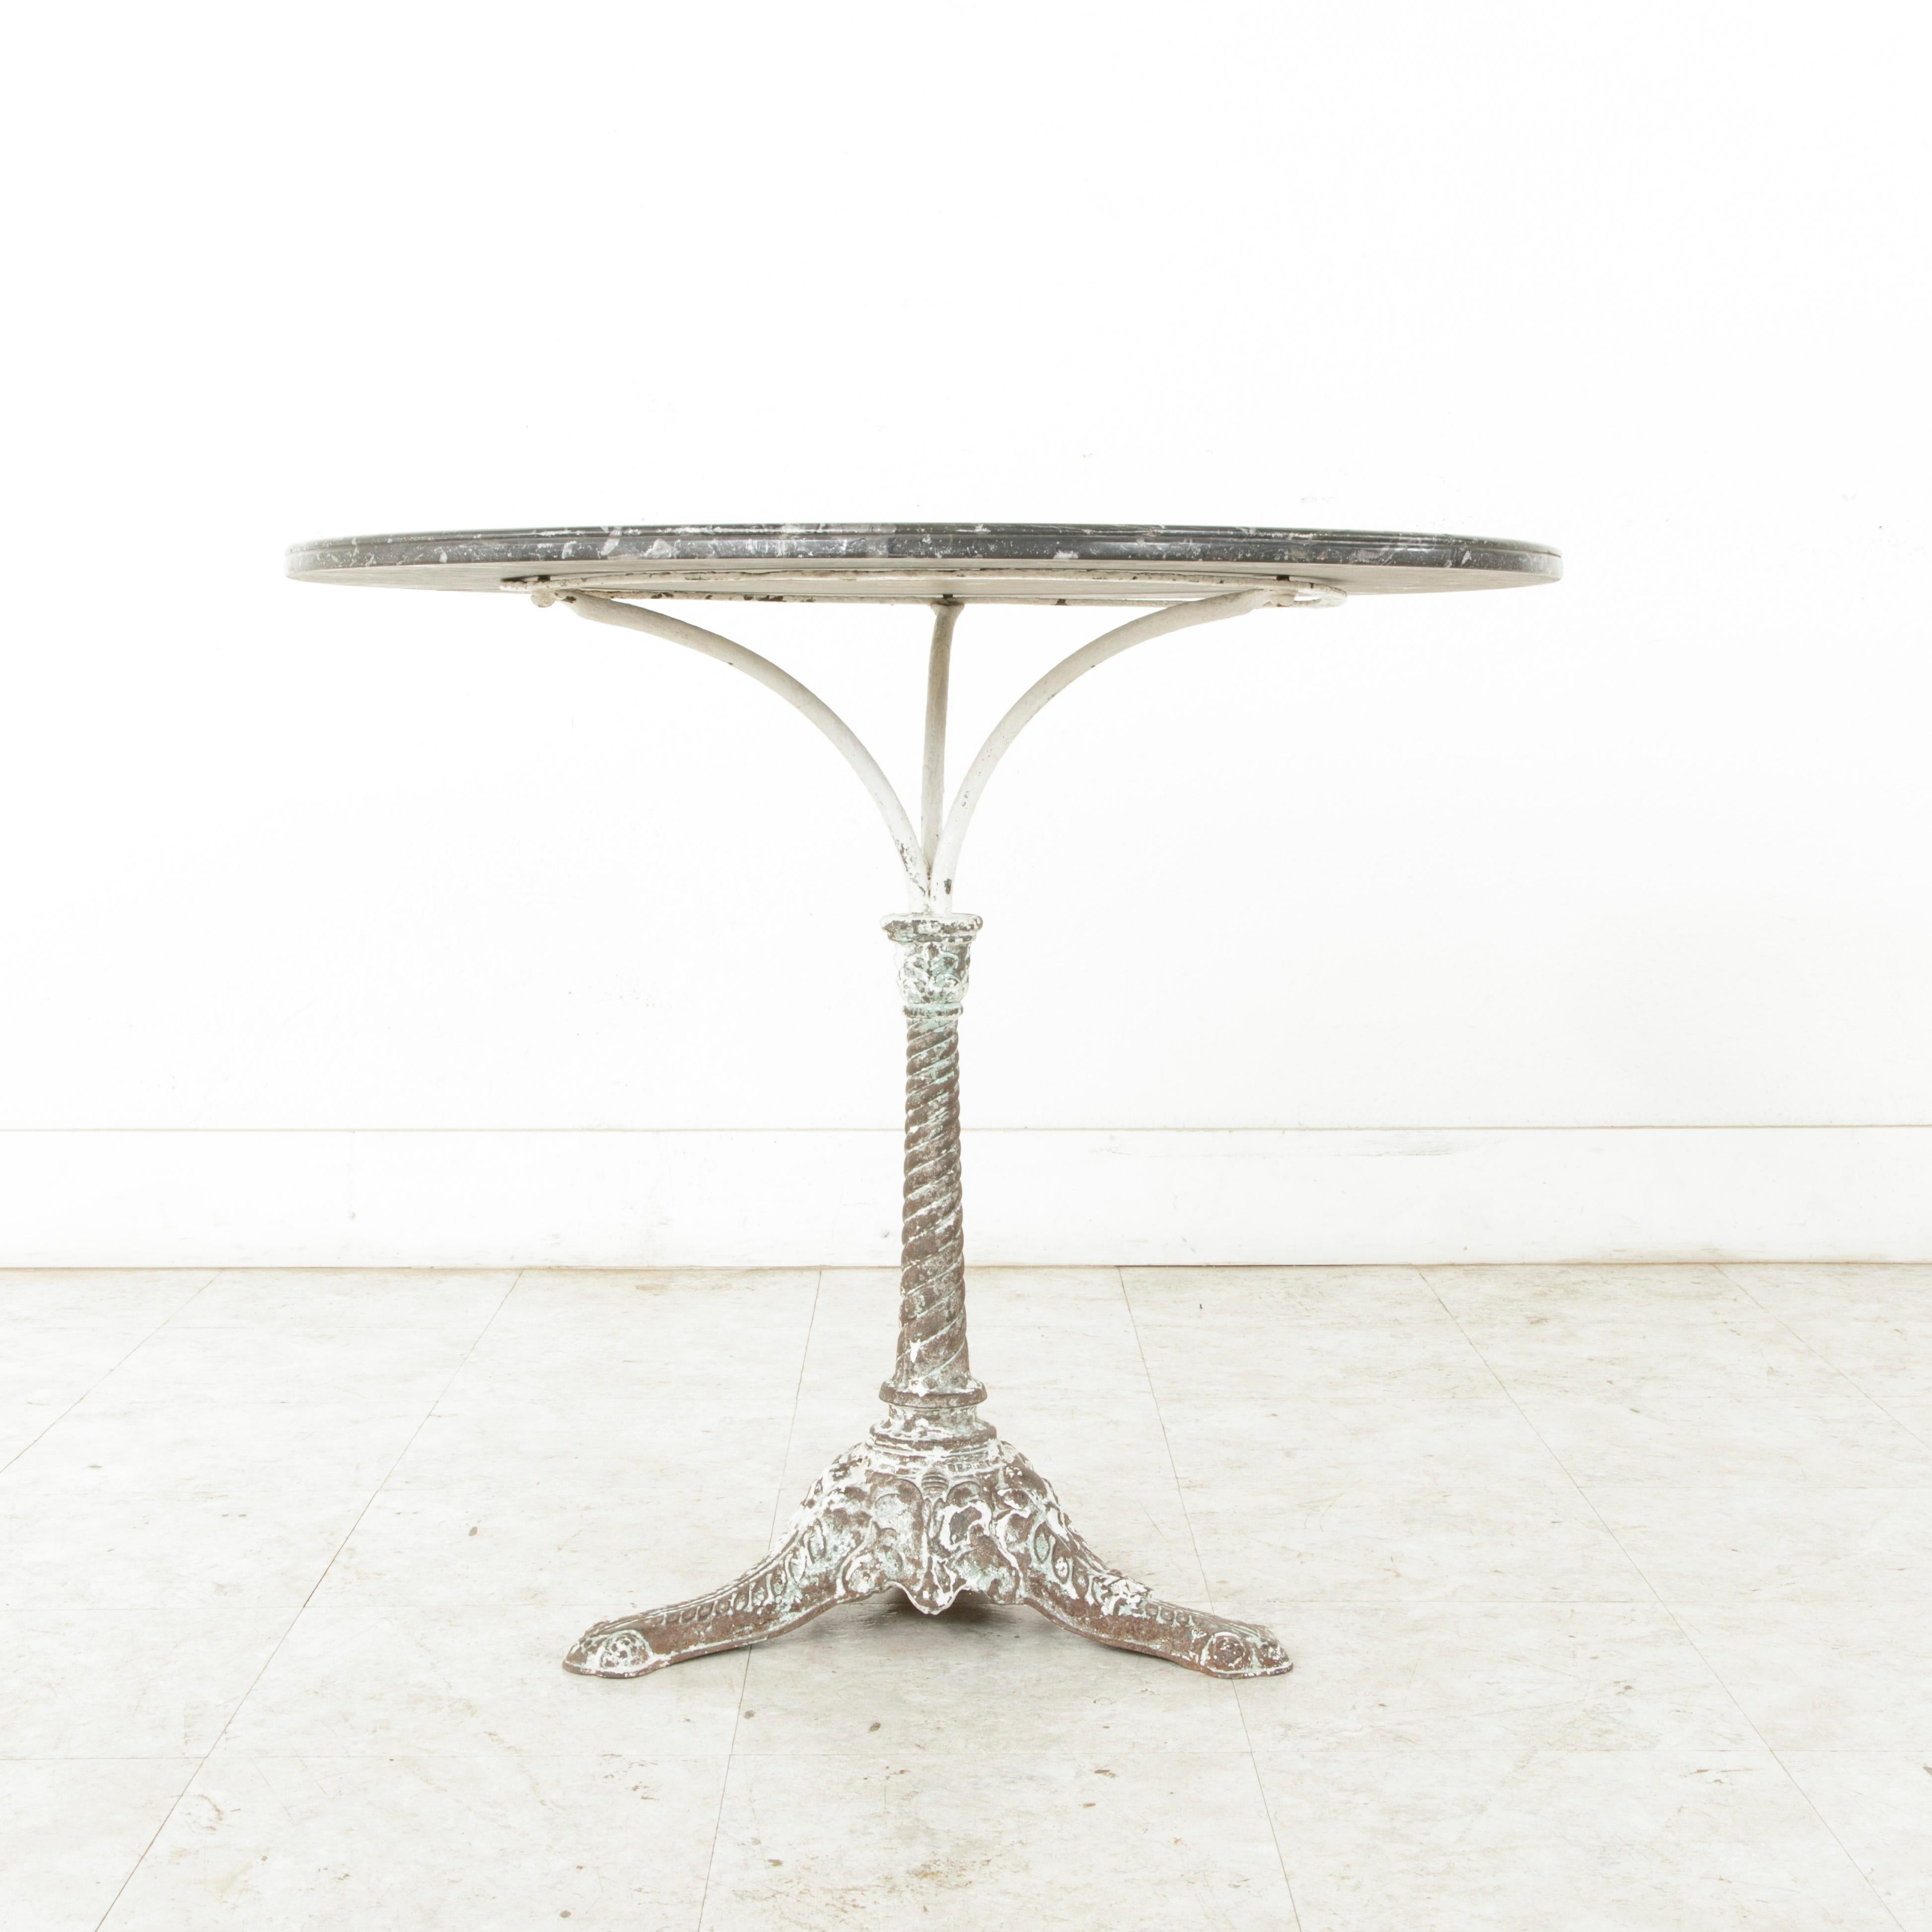 Early 20th Century French Iron Garden Table with Marble Top, circa 1900